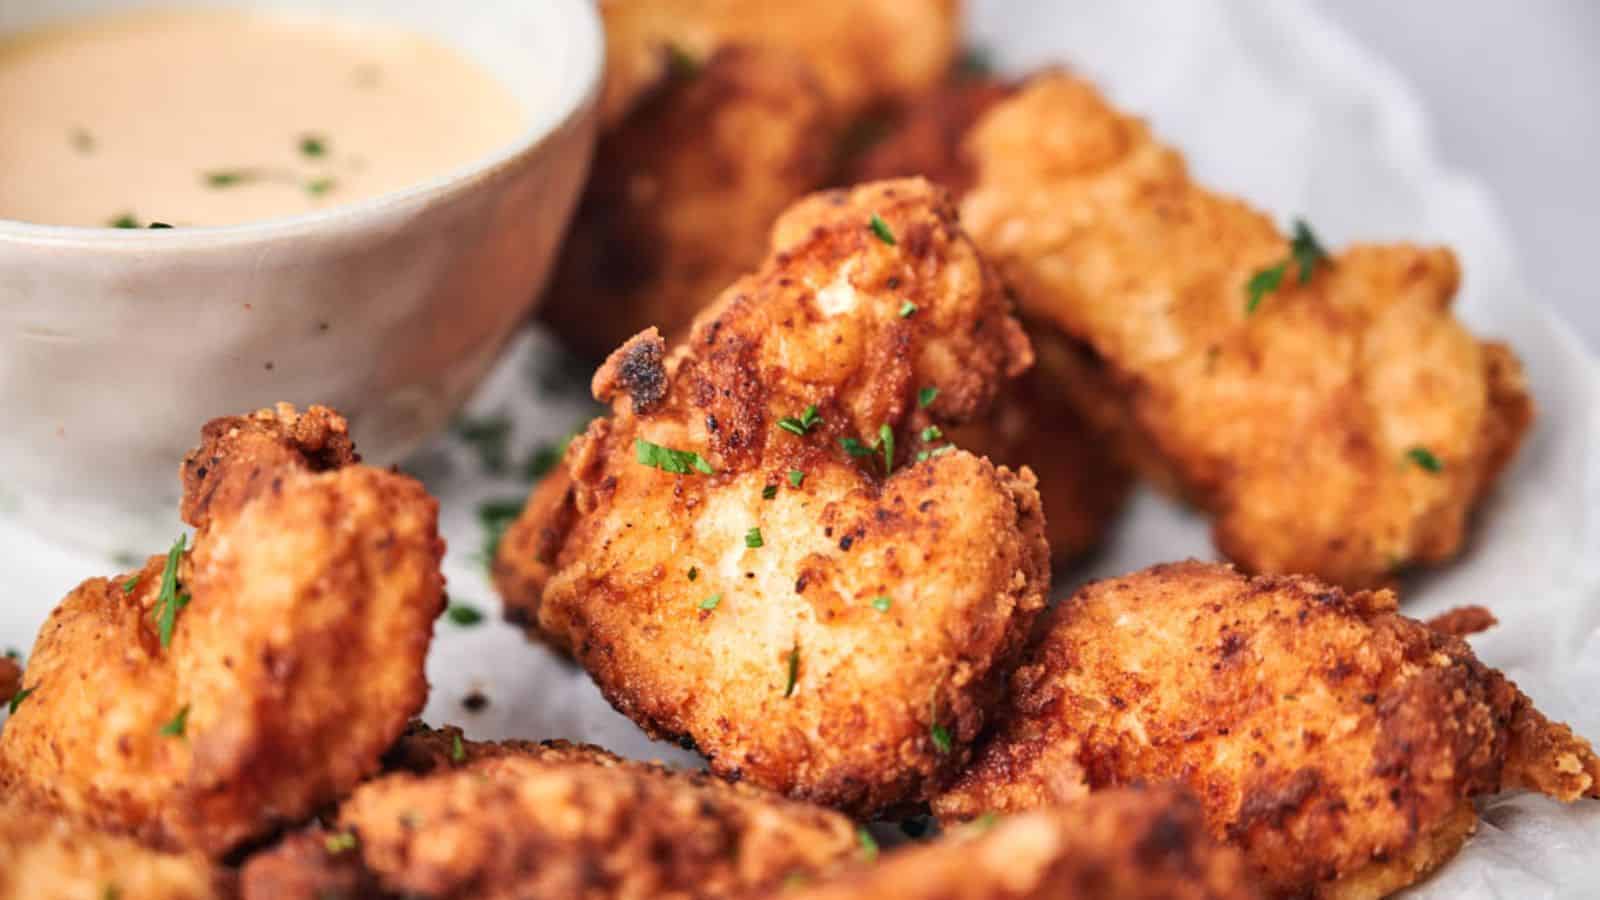 Golden fried chicken pieces with a side of dipping sauce.